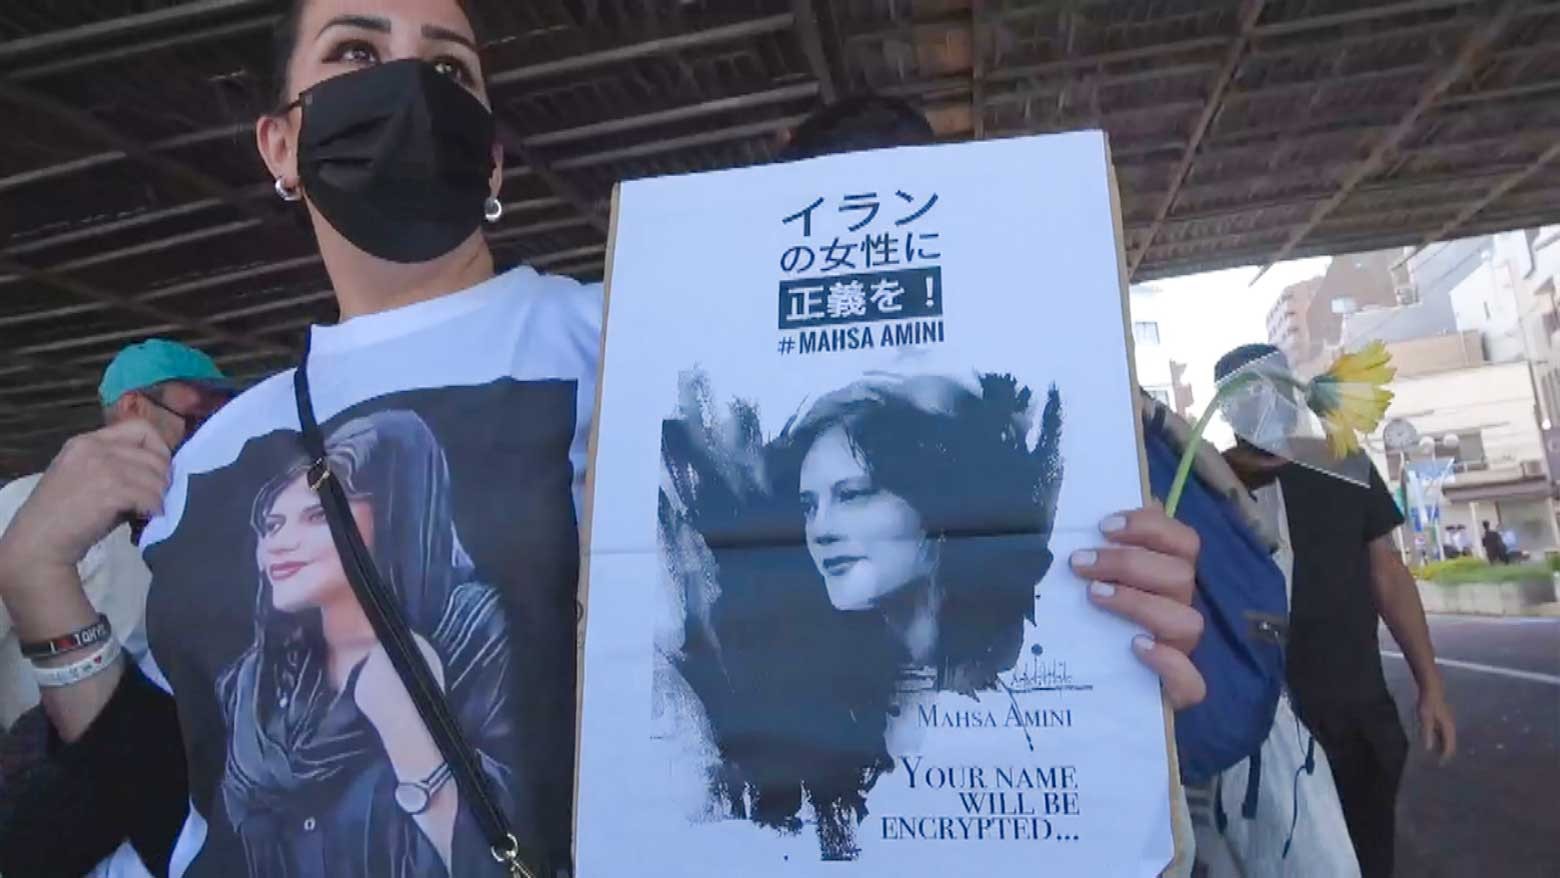 Iranians in Japan take to the streets